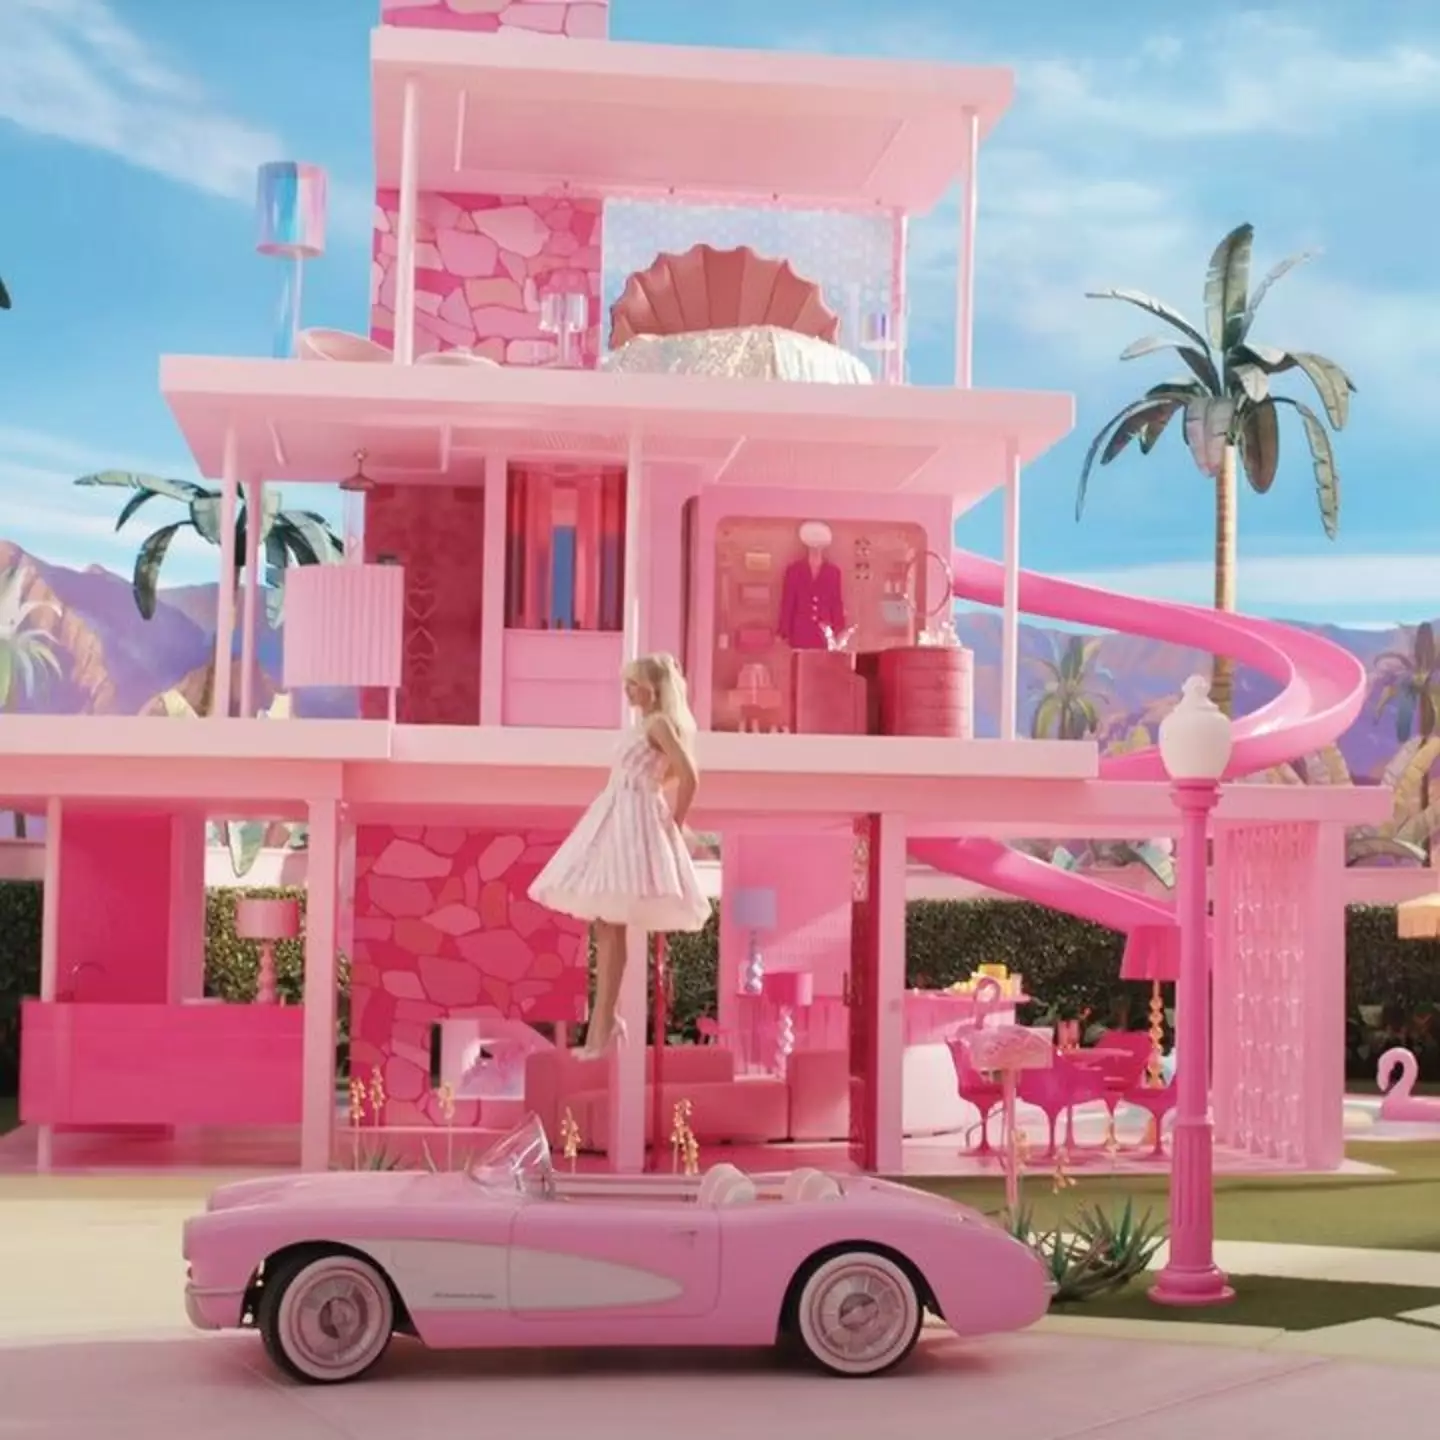 The full-scale Barbie Beach House will give fans a closer look inside Barbie’s iconic closet.